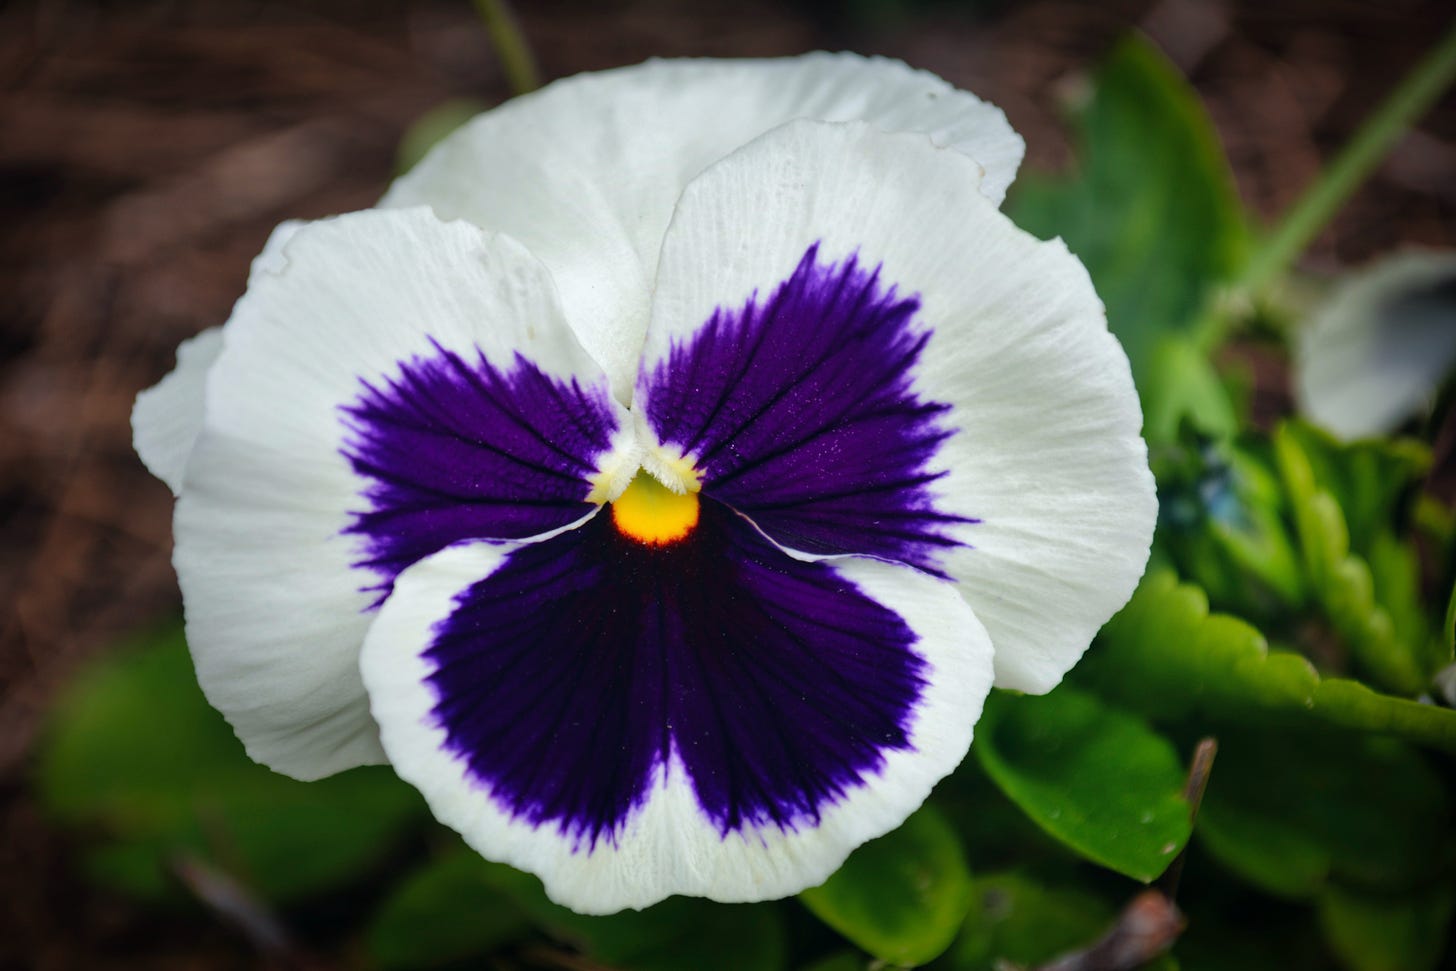 A single white pansy with a dark purple center against the green leaves